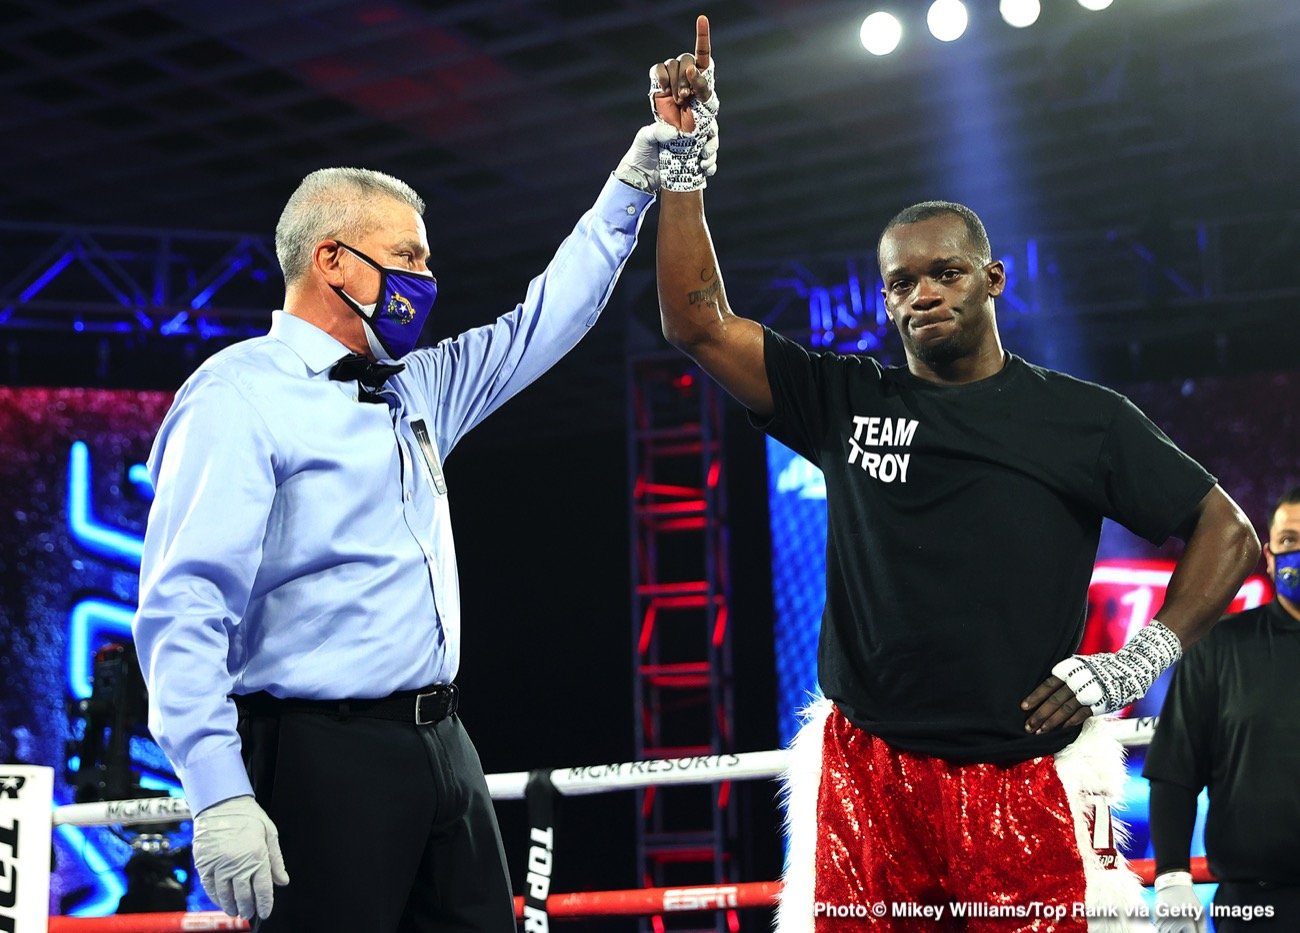 Richard Commey stops Marinez in 6th round - Boxing Results